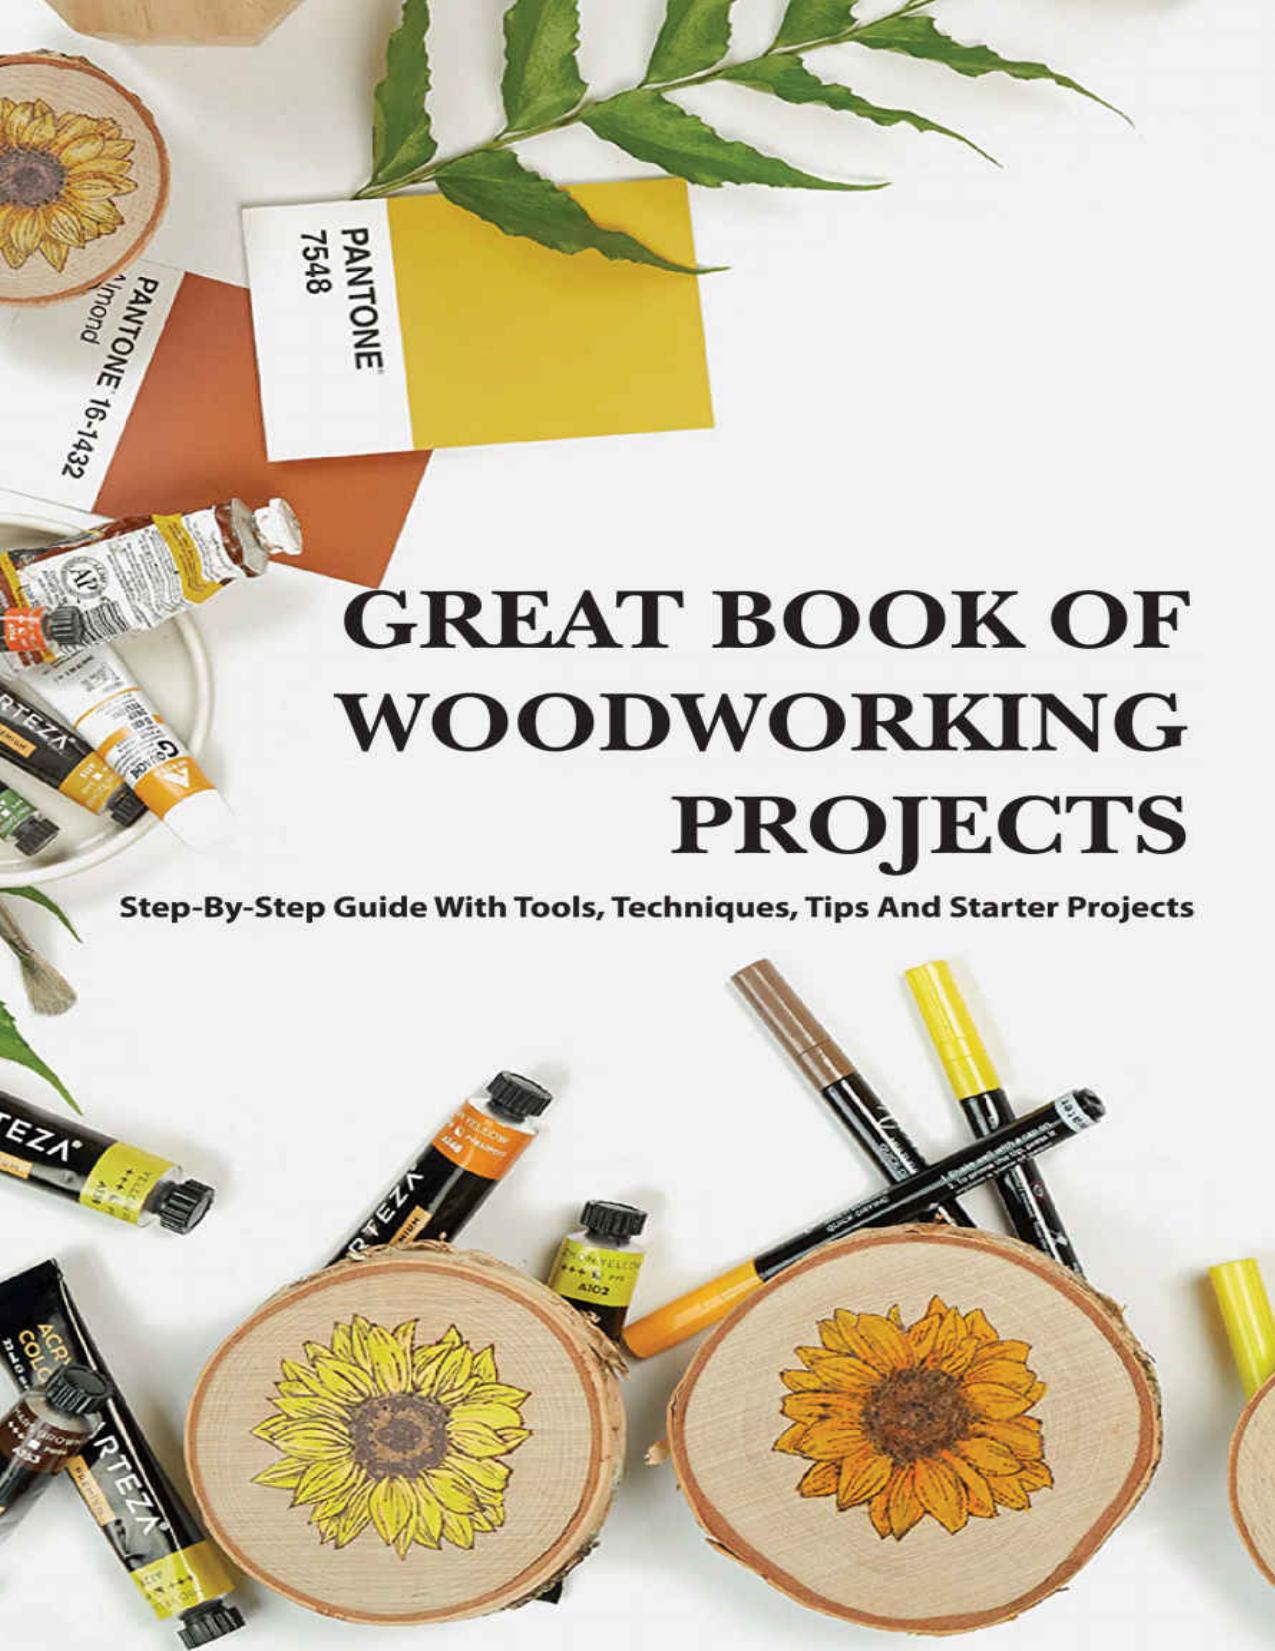 Great Book Of Woodworking Projects- Step-by-step Guide With Tools, Techniques, Tips And Starter Projects: Woodworking Plans And Projects by Boris Studyvance